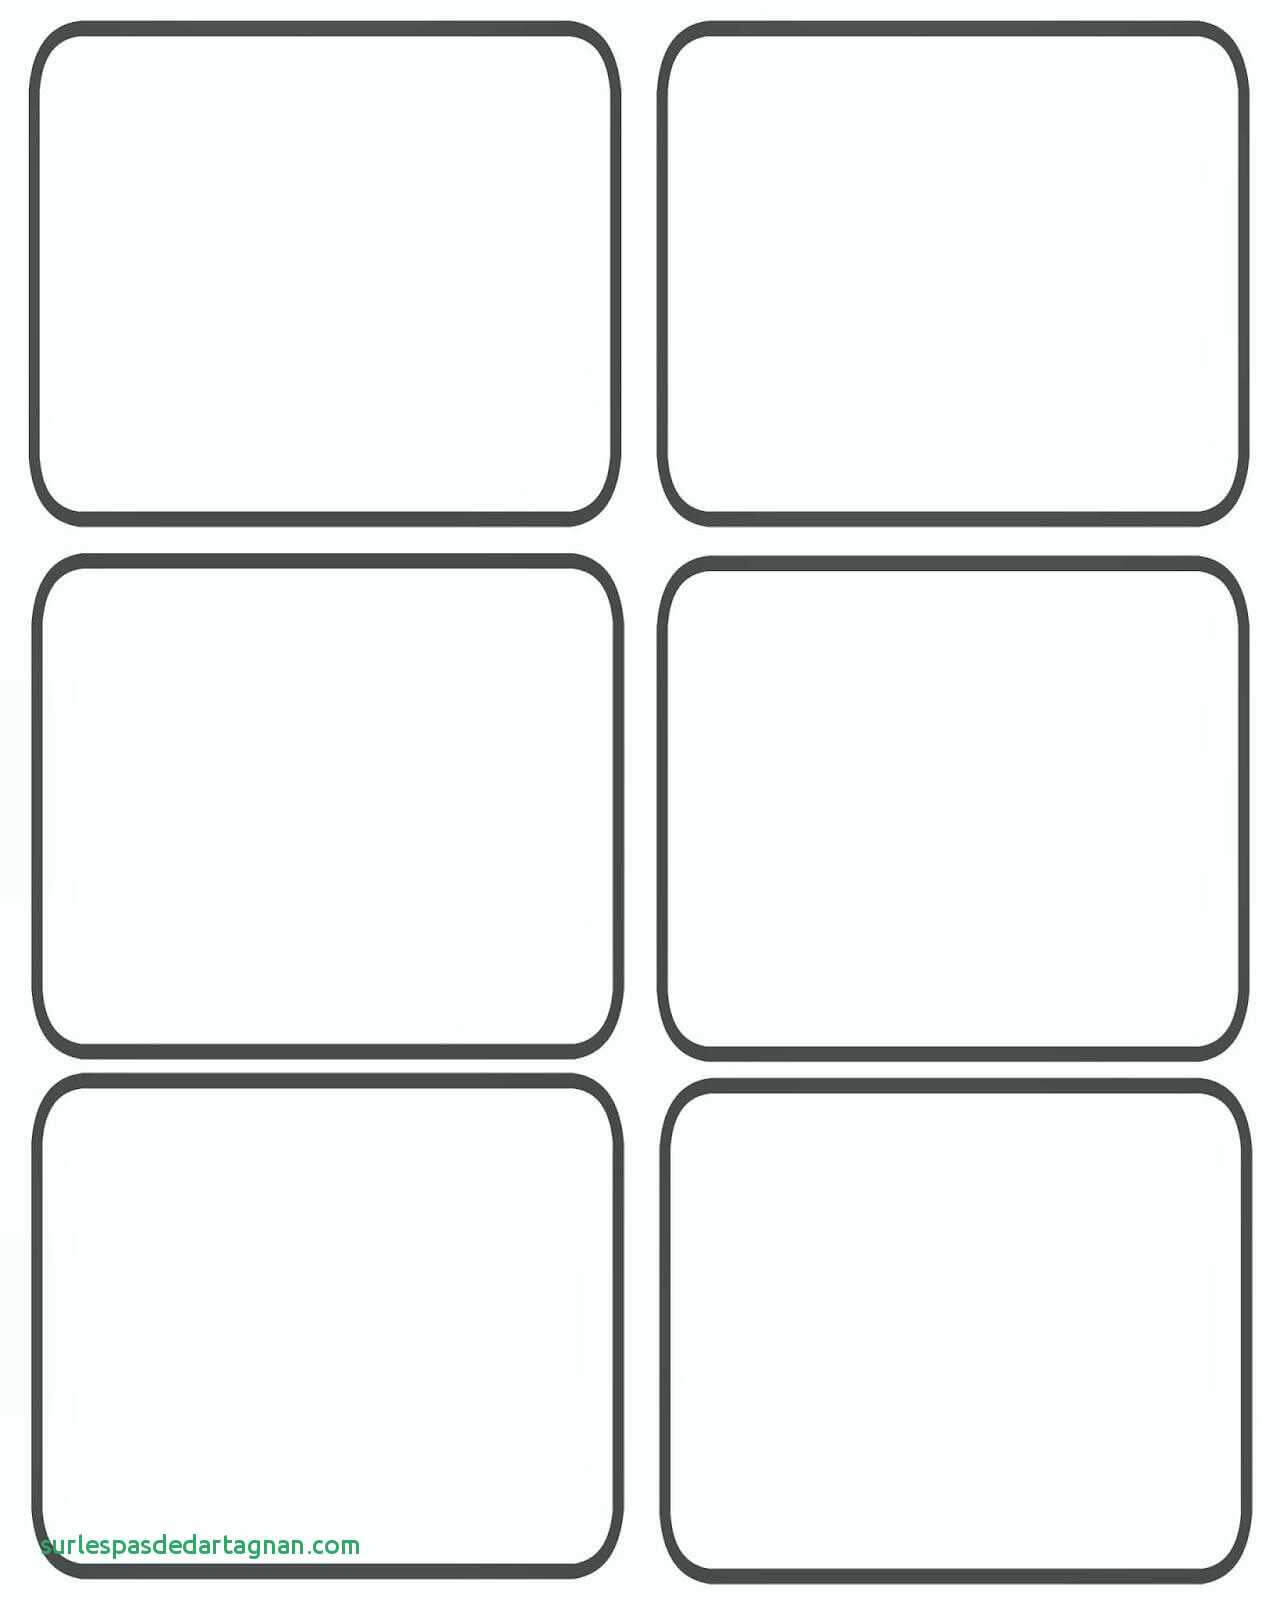 Playing Card Templates Free | C Punkt With Blank Playing Card Template